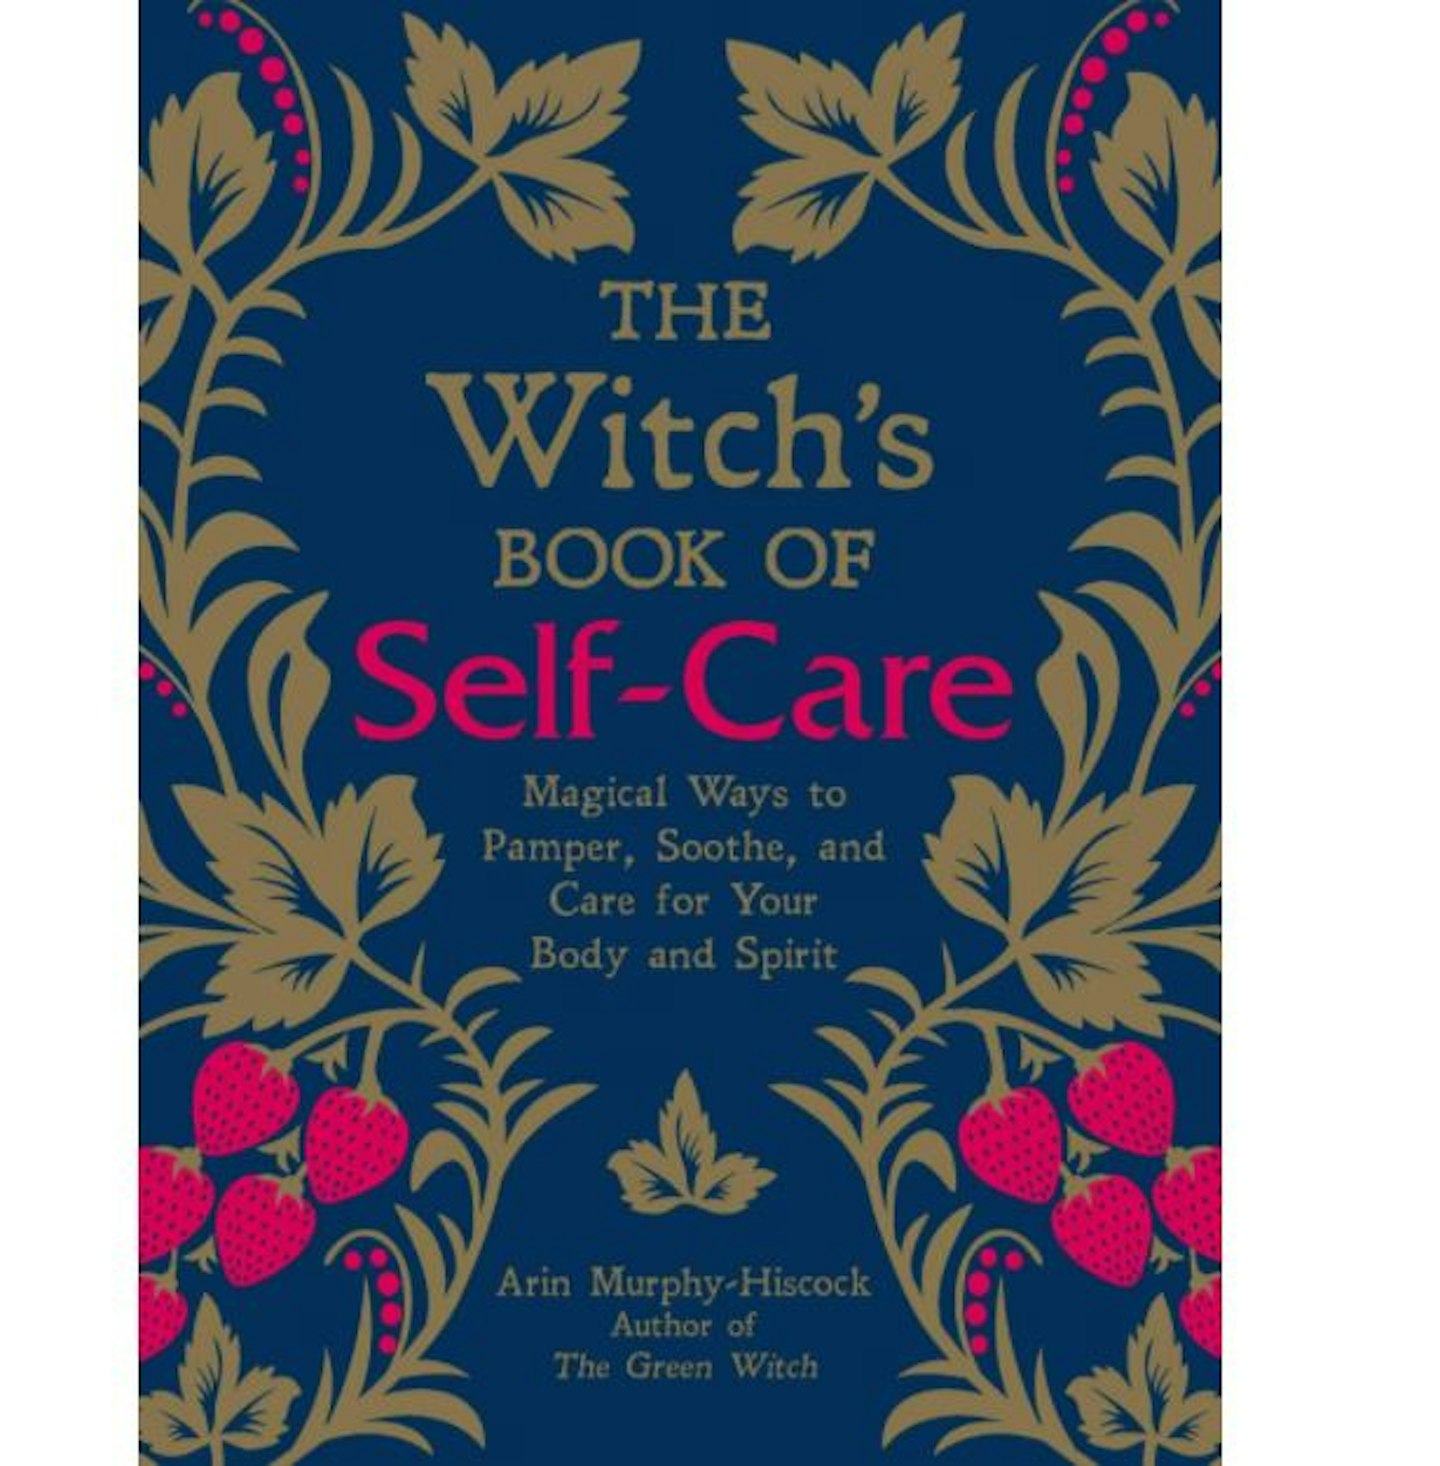 The Witchu2019s Book of Self-Care by Arin Murphy-Hiscock